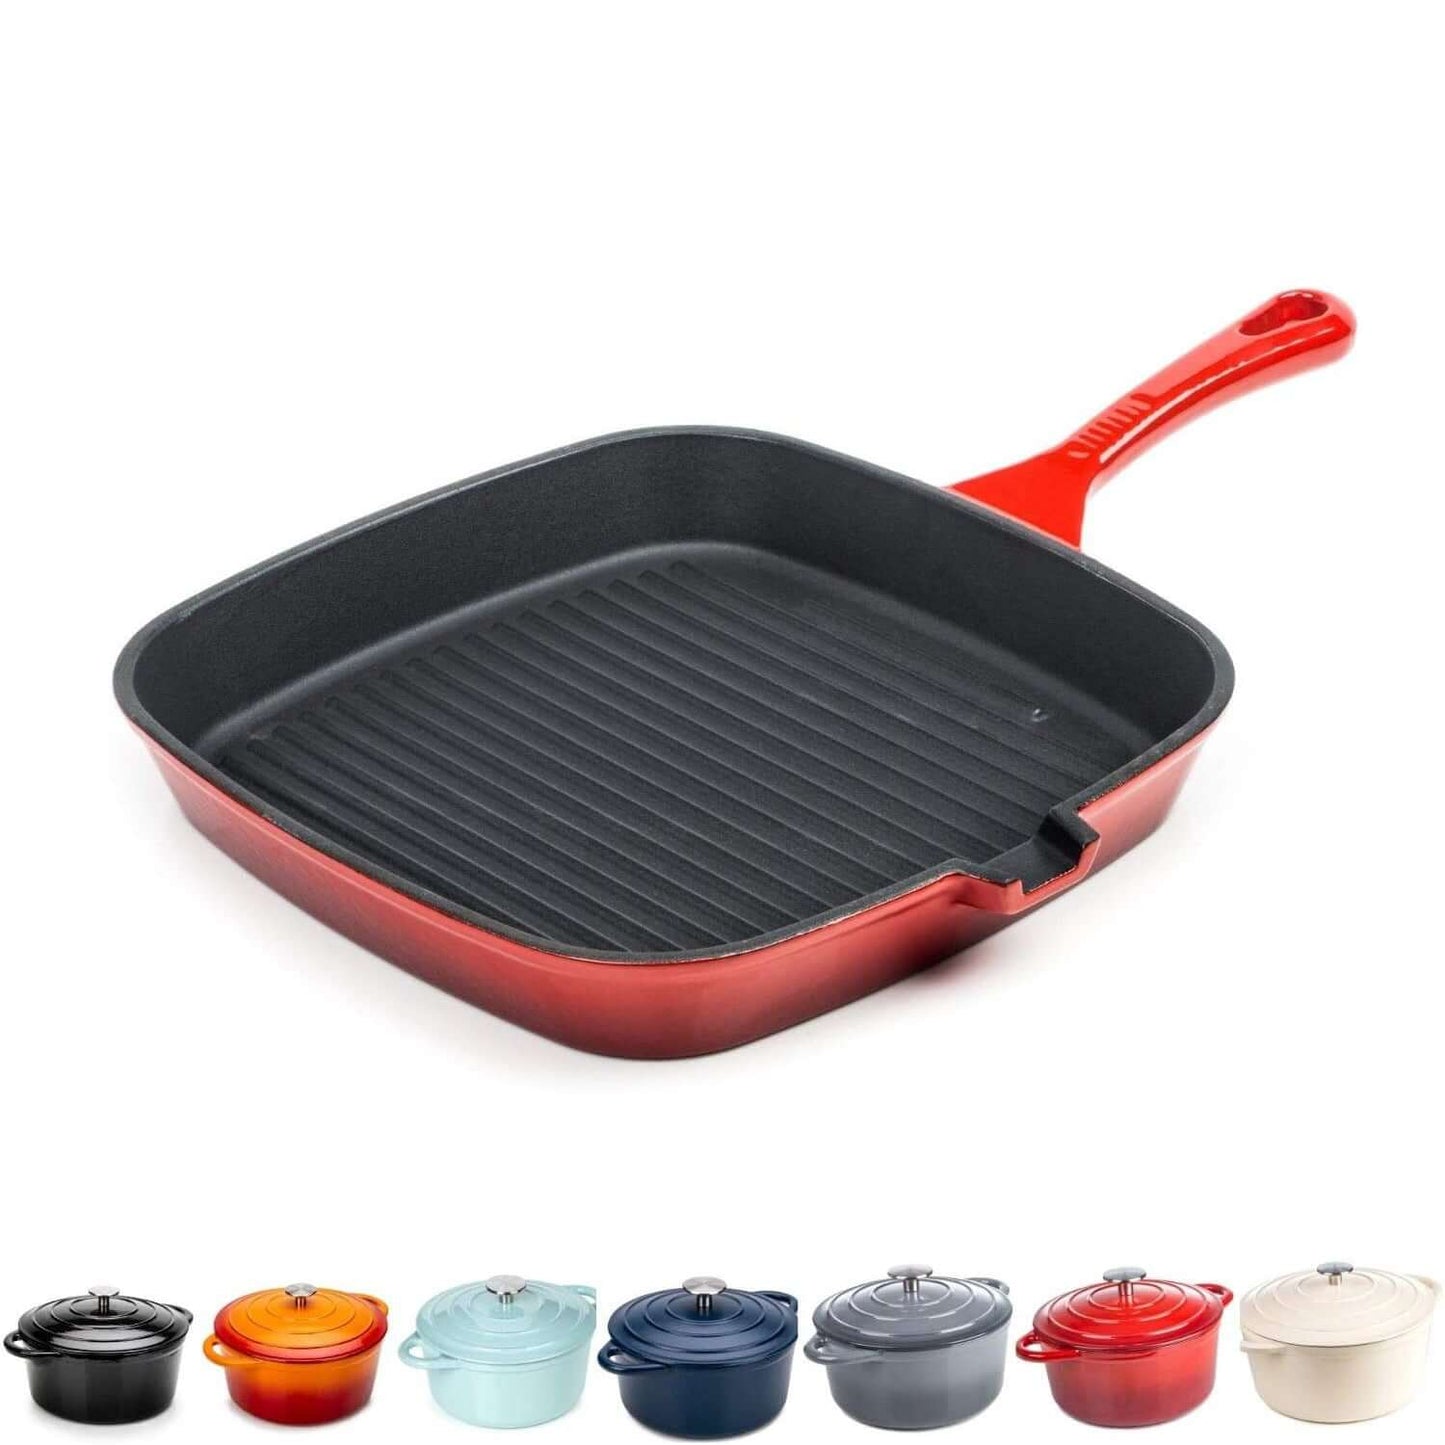 23.5cm Cream/Red/Grey Grill Griddle Pan Cast Iron Square Frying Pan Induction and Gas 10 Yr Guarantee